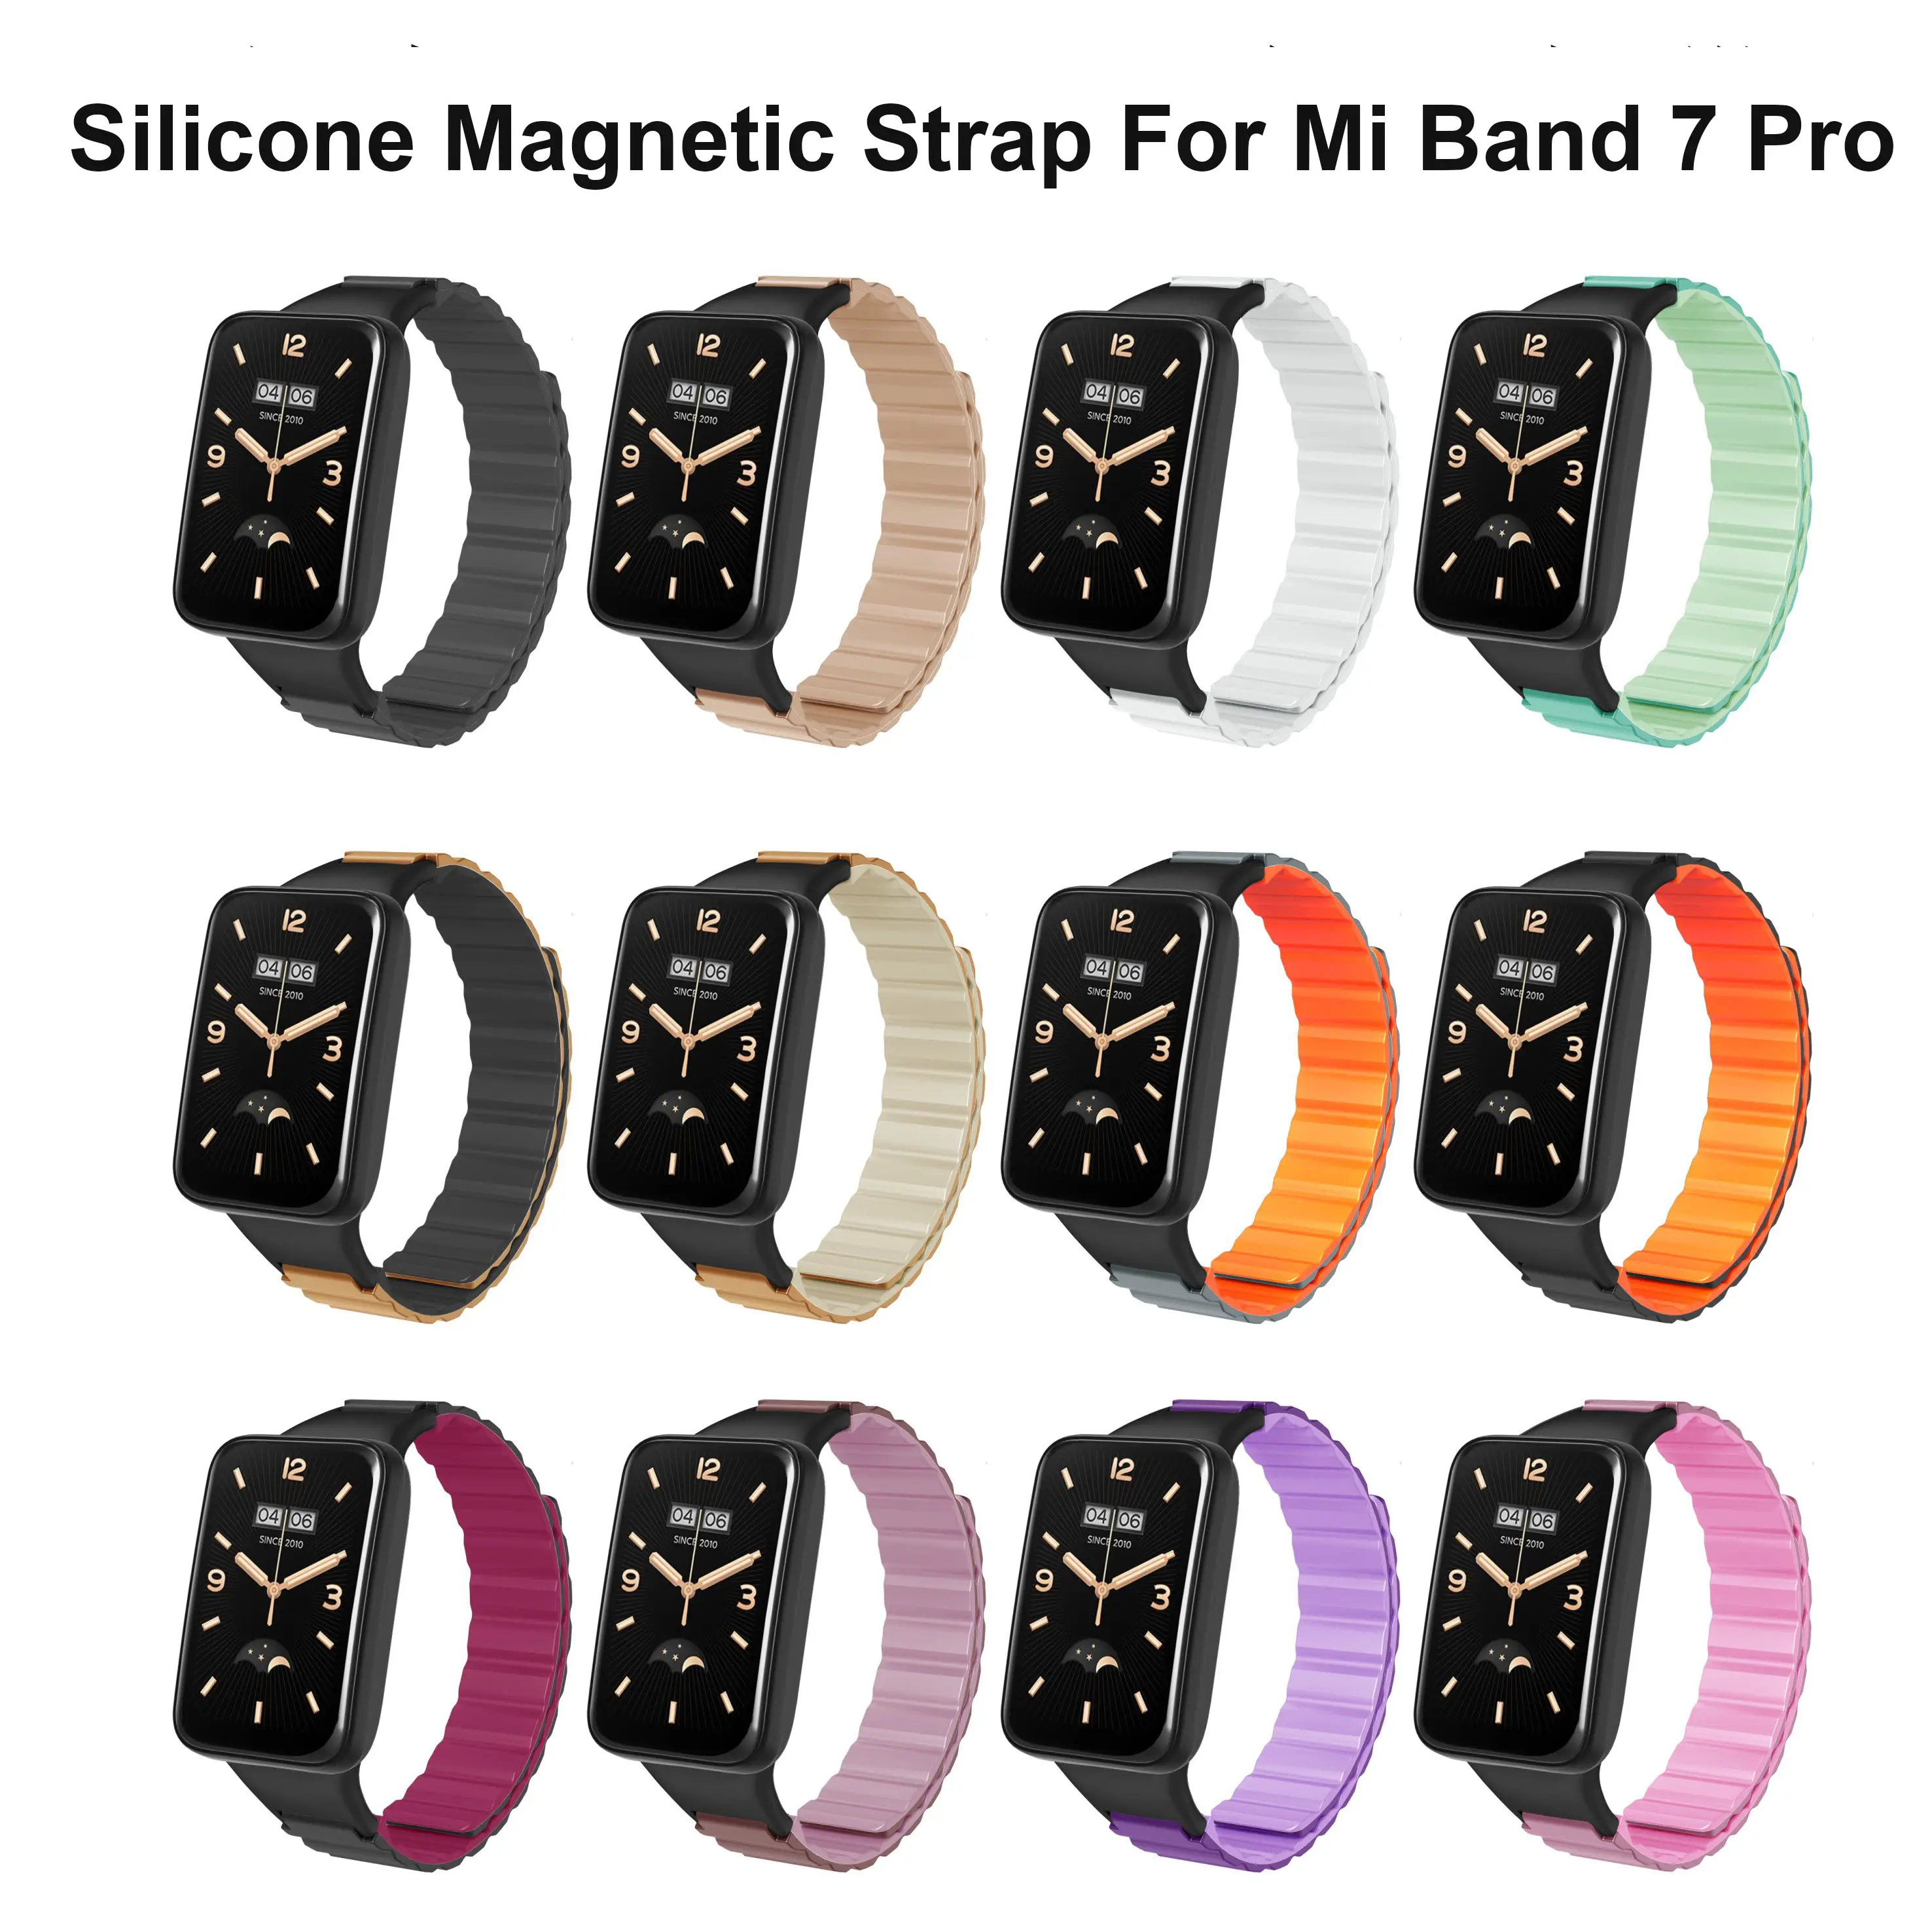 Silicone Magnetic Strap For Xiaomi Mi Band 7 Pro Wristband Wrist Straps Watchband For Mi 7pro Magnetic Band Smart Watch Strap